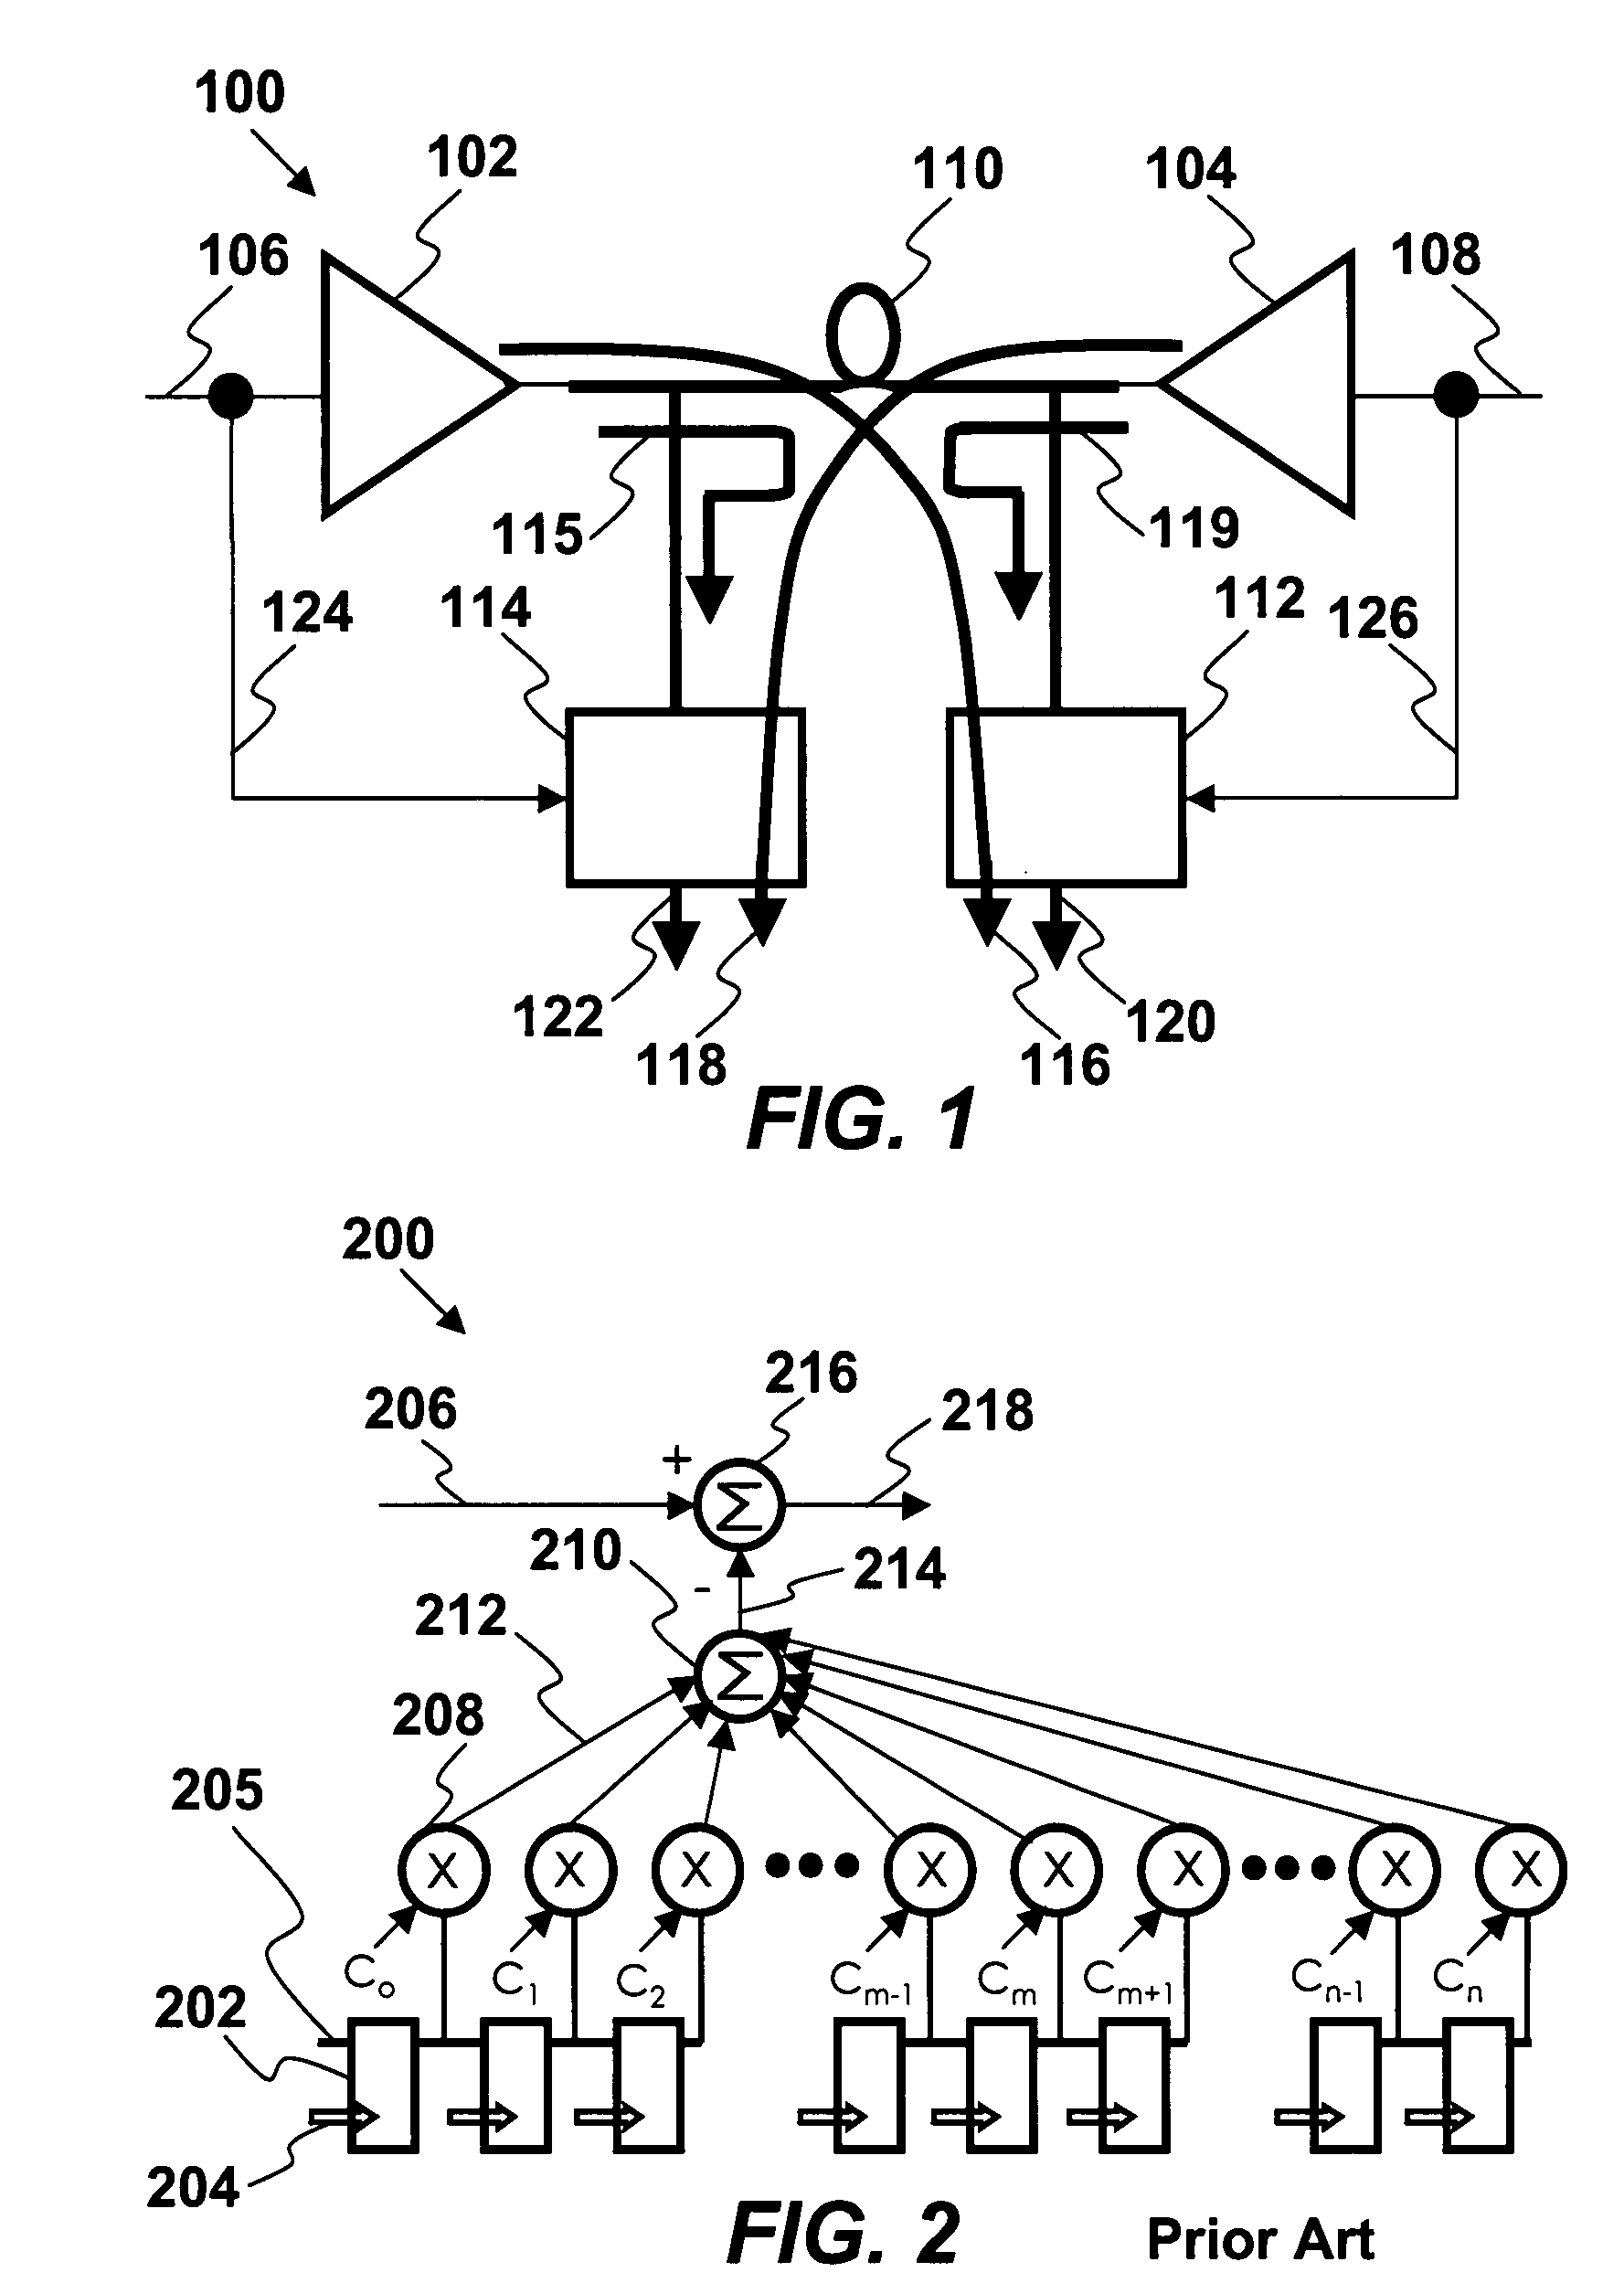 Use of line characterization to configure physical layered devices